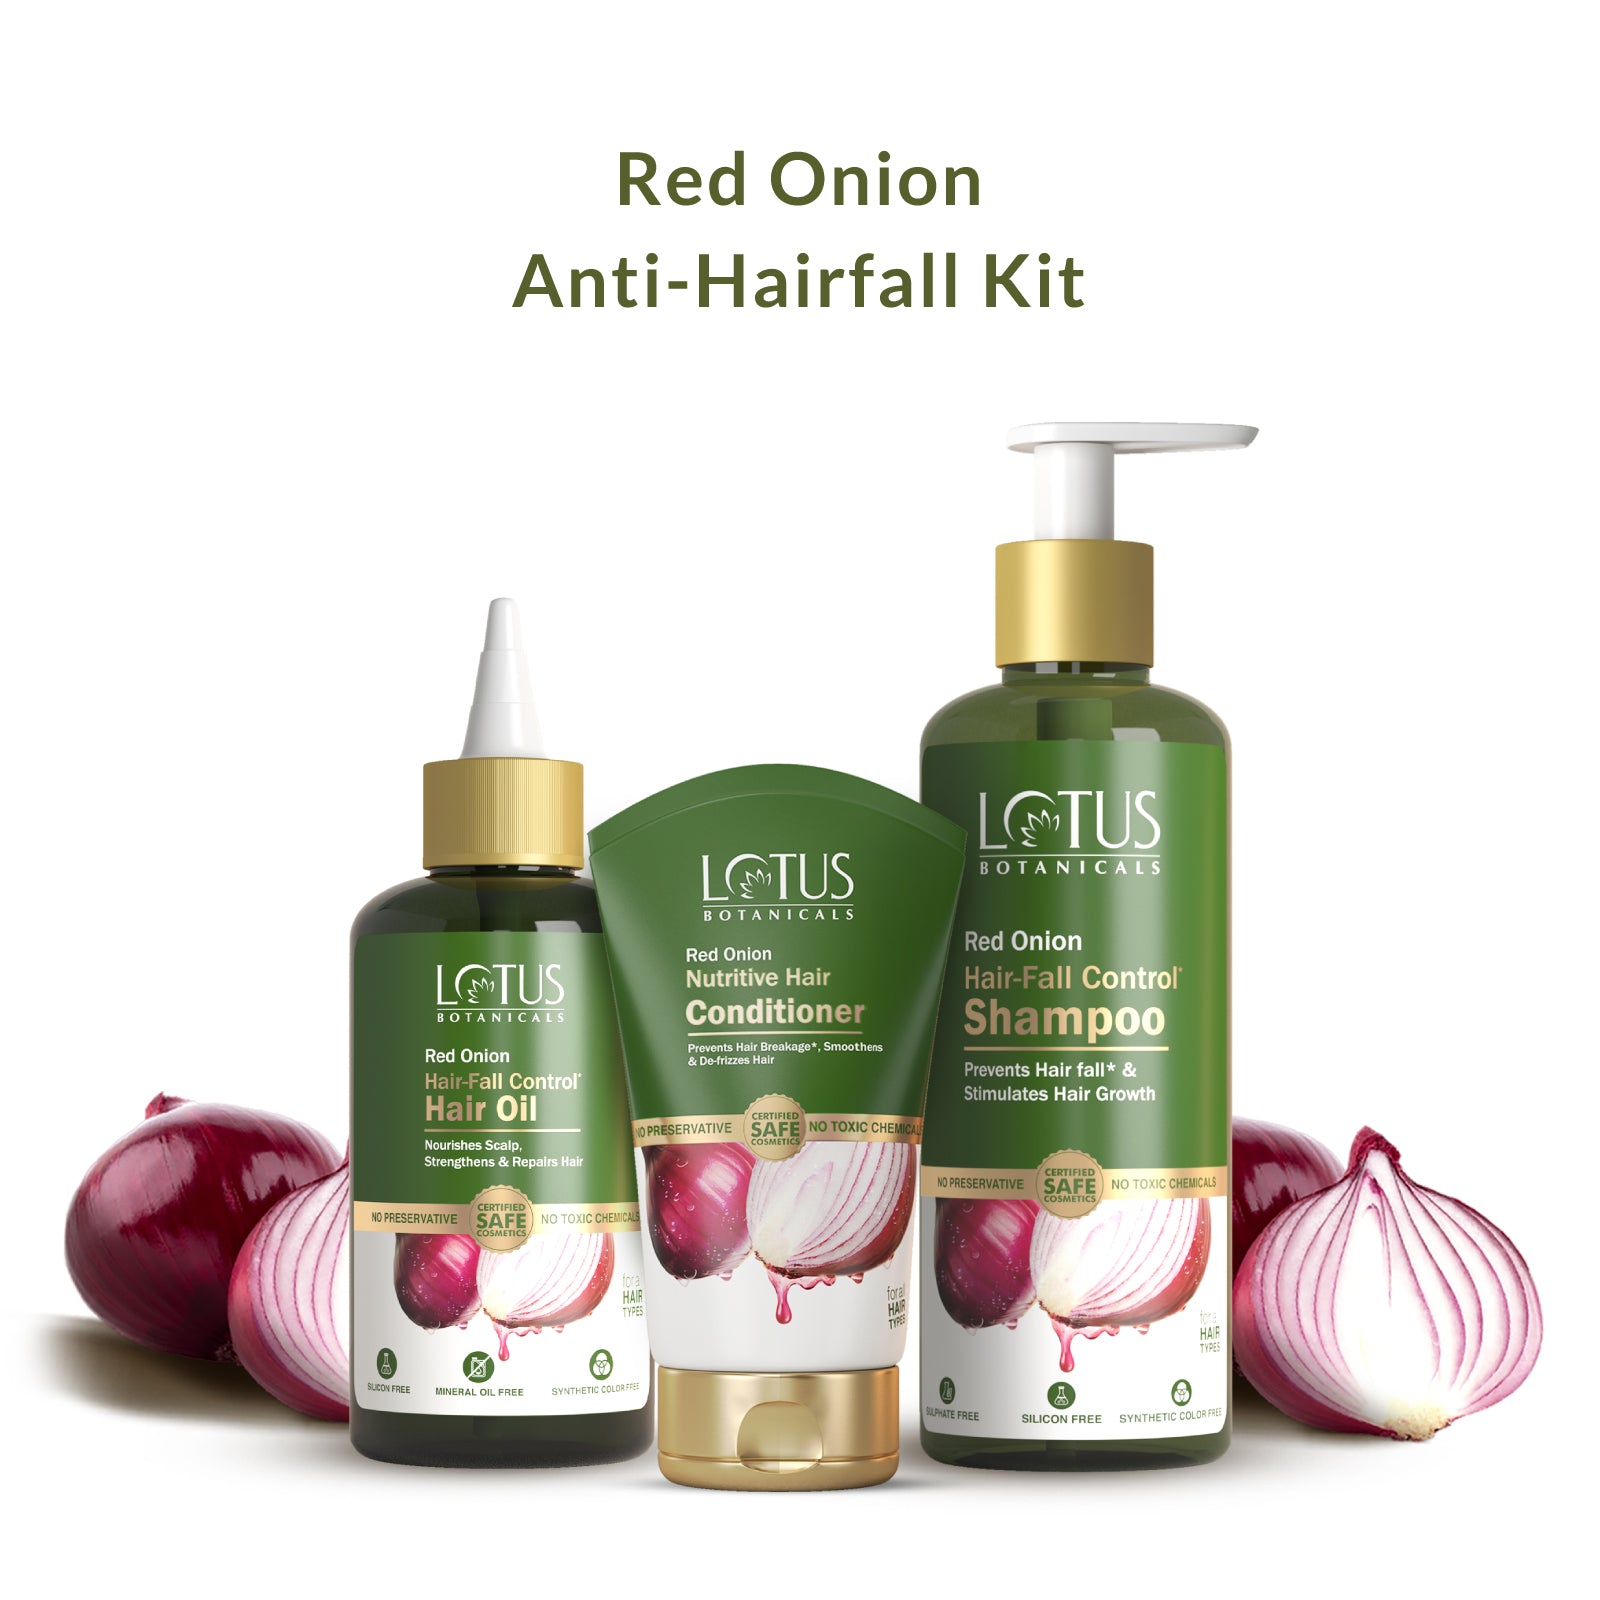 Red Onion Anti HairFall Kit - Natural hair care solution with red onion extract for combating hair loss